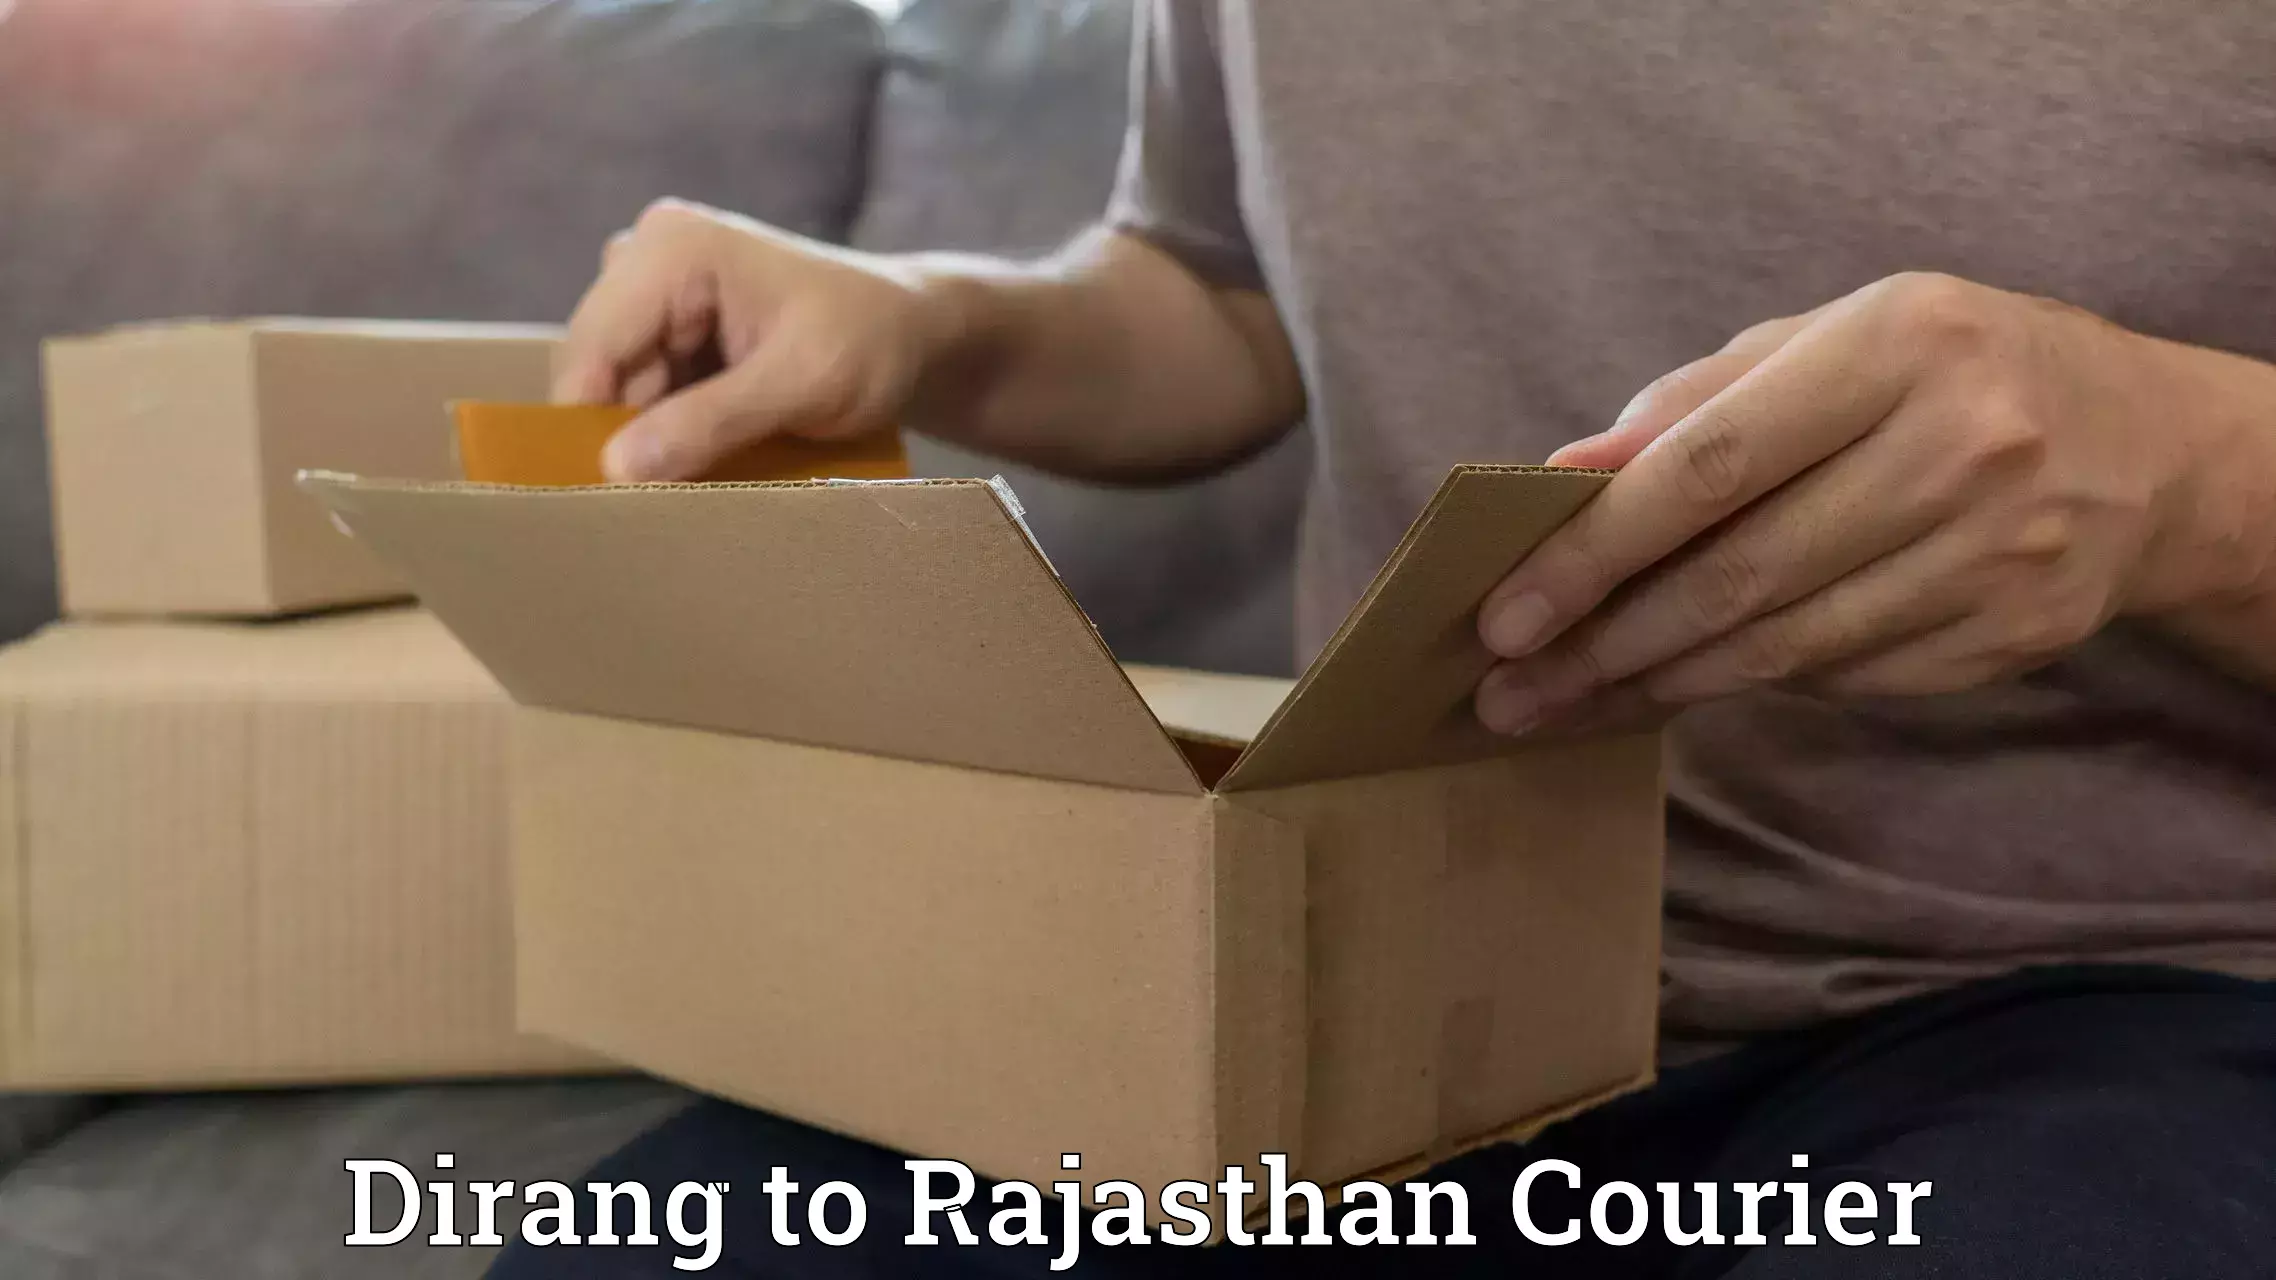 User-friendly delivery service Dirang to Rajsamand